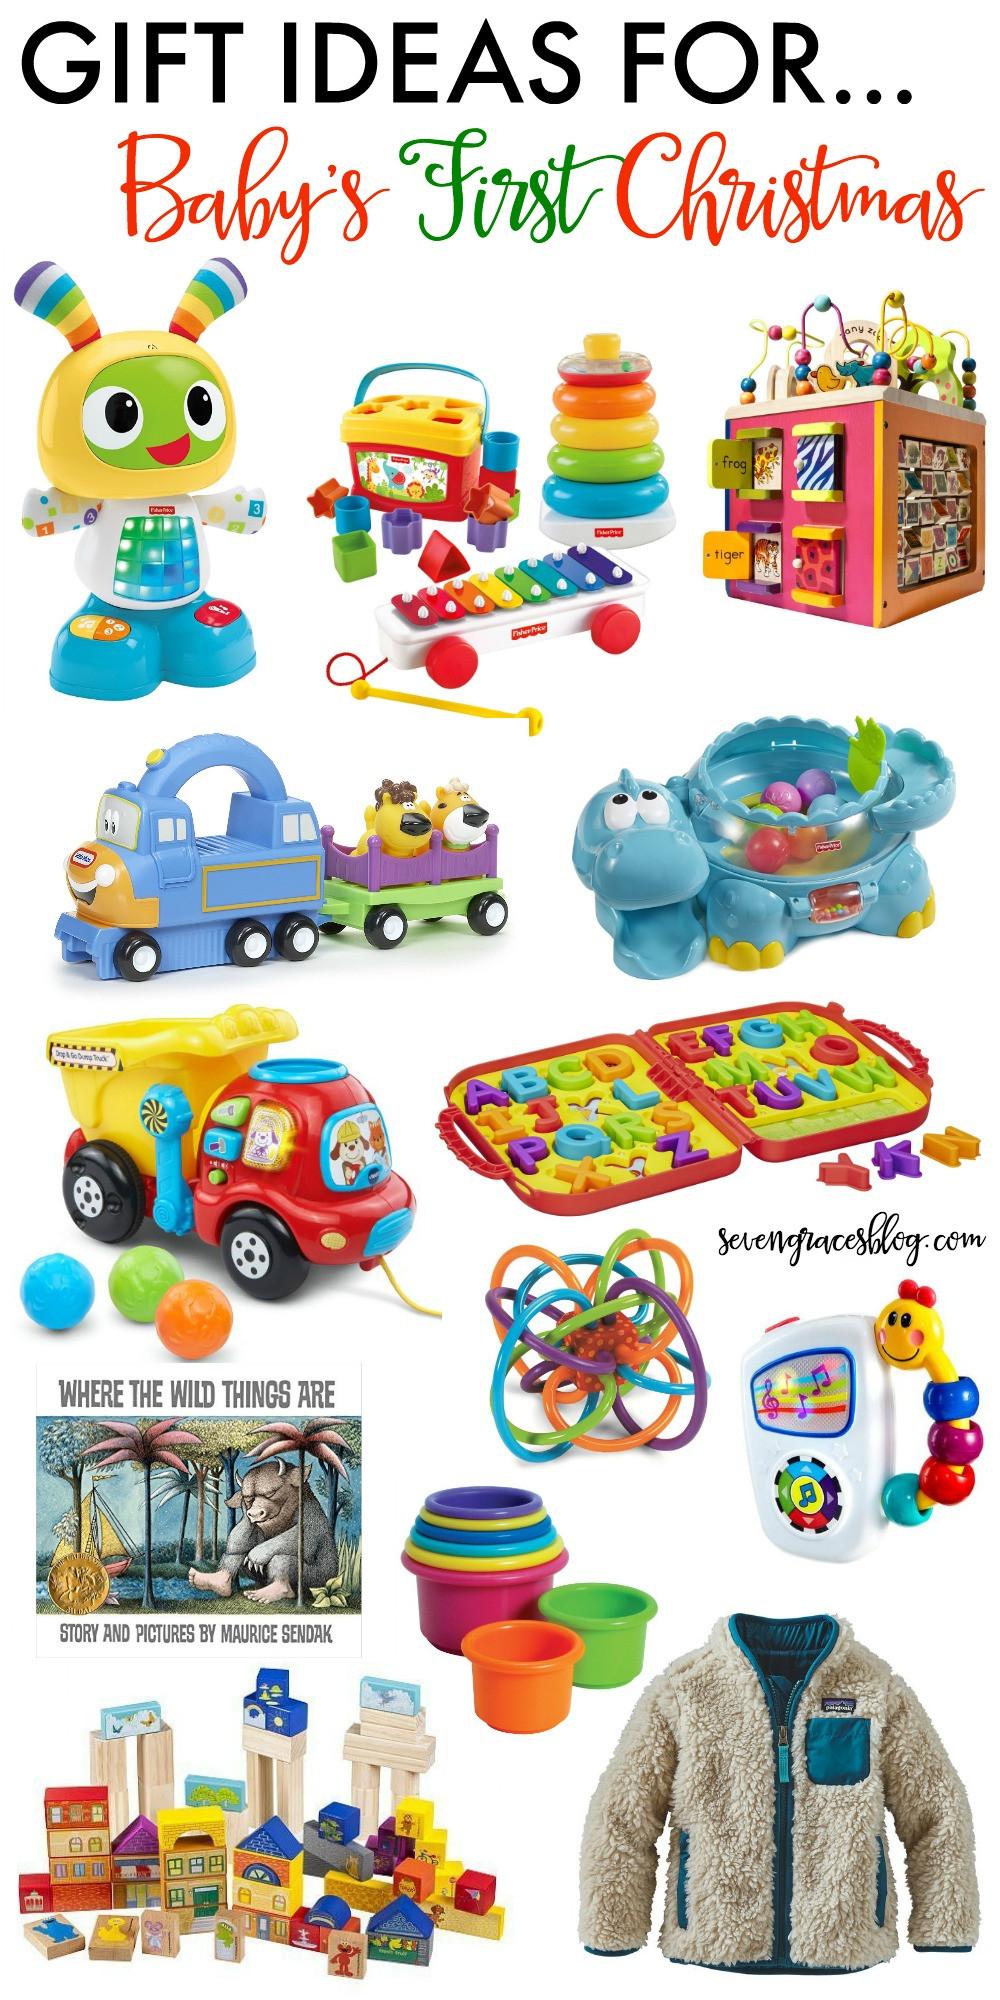 Christmas Gift Ideas For Toddler Boy
 Gift Ideas for the Preschool Girl and for Baby s First